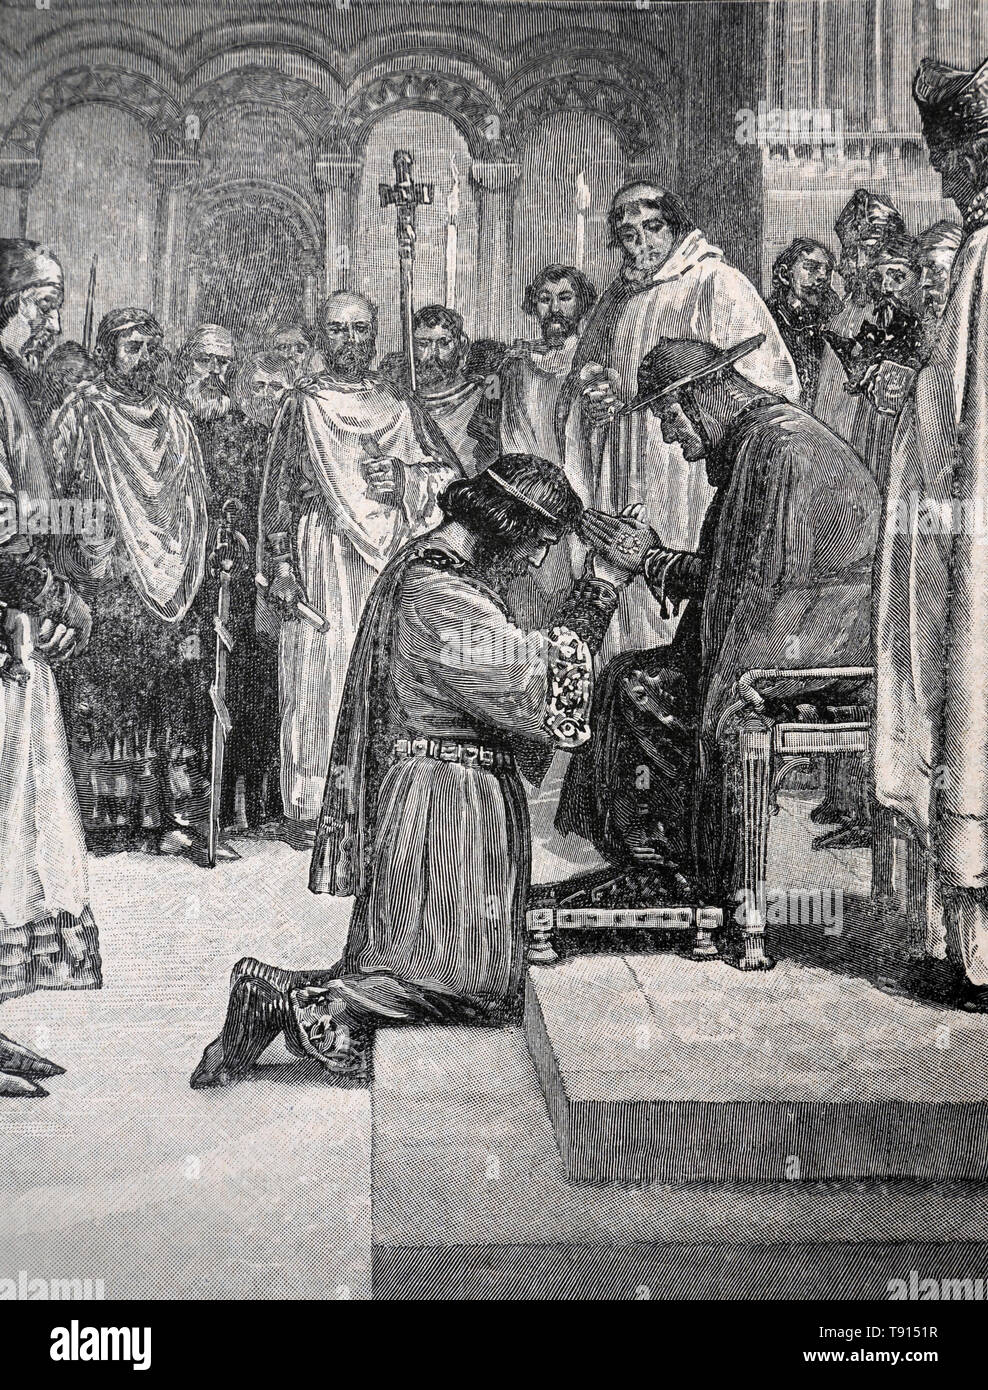 Illustration Depicting King John at the Church of the Templars in Dover kneeling down before the Papal Legate Pandulph taking the oath of fealty to th Stock Photo